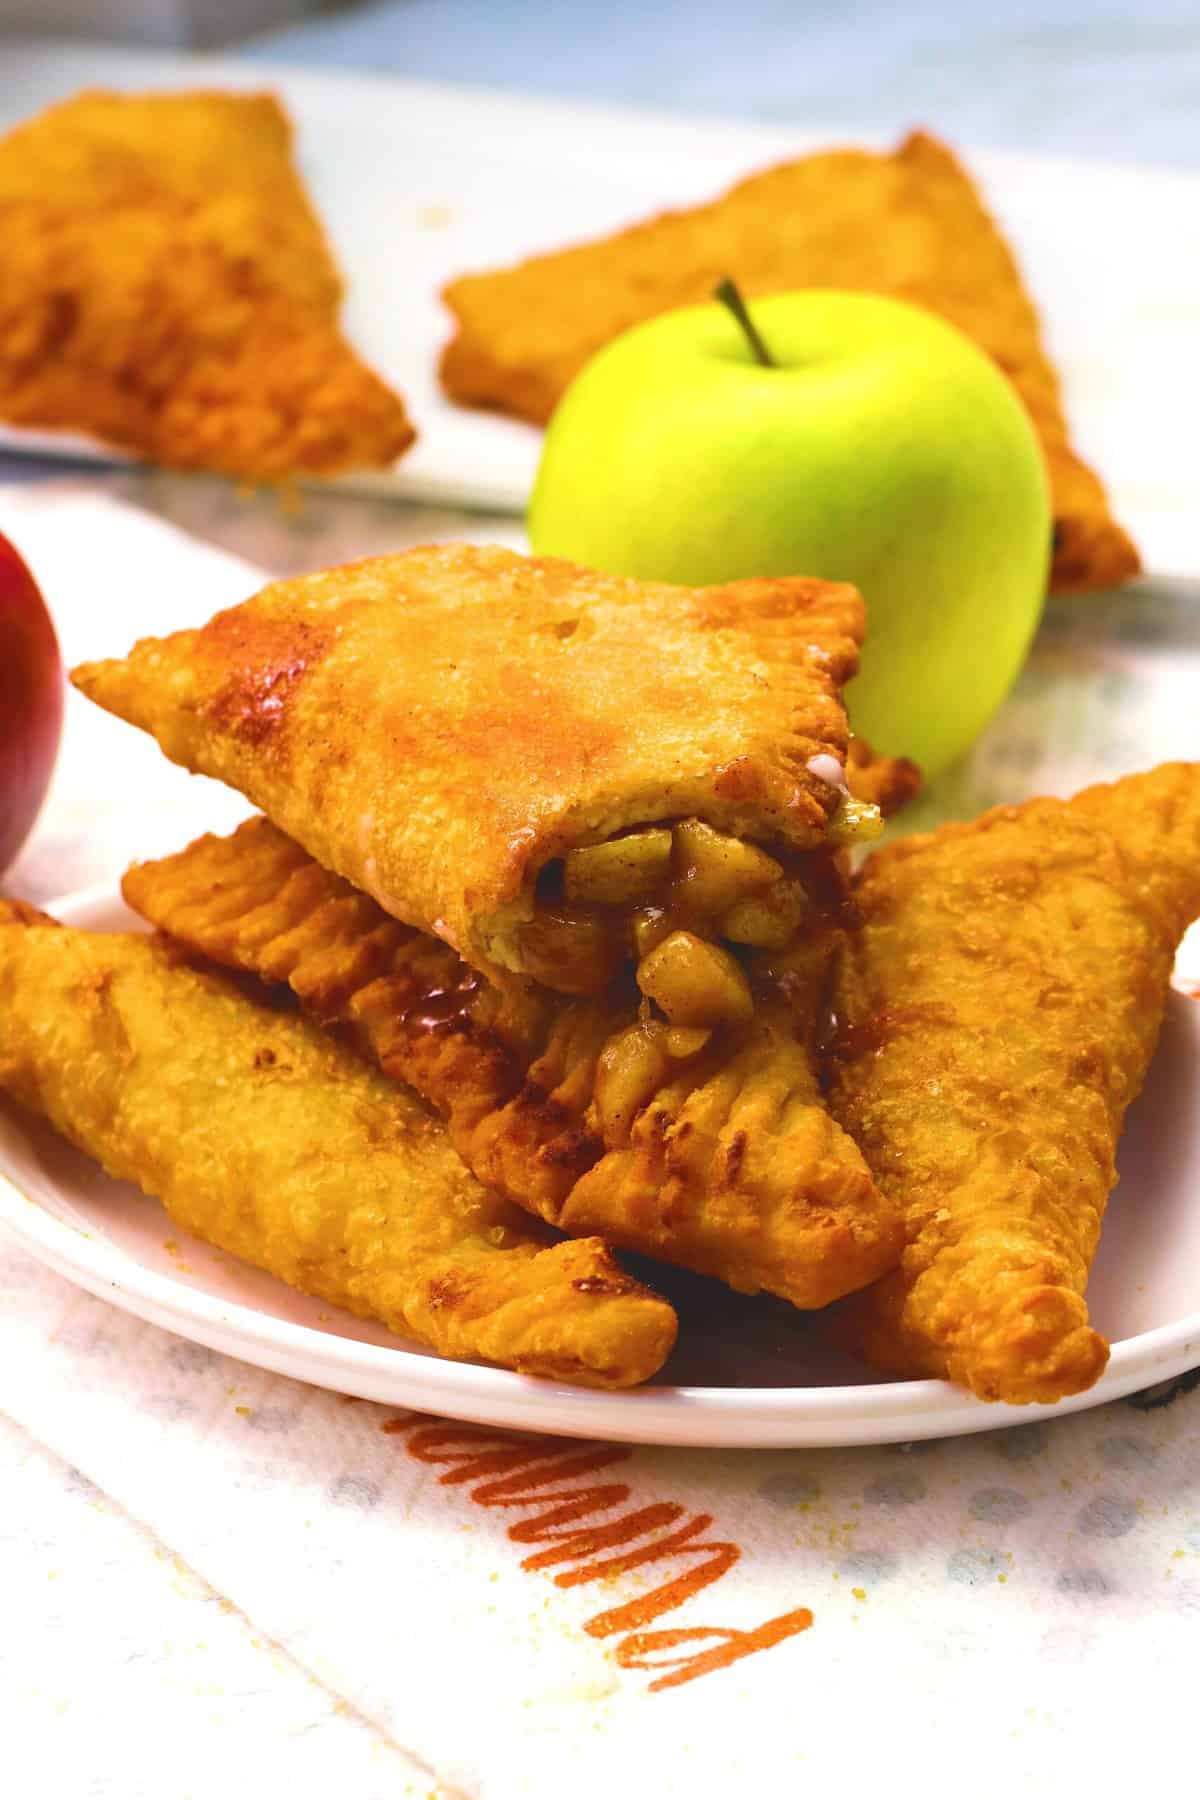 Freshly fried apple pies to bring out the smiles